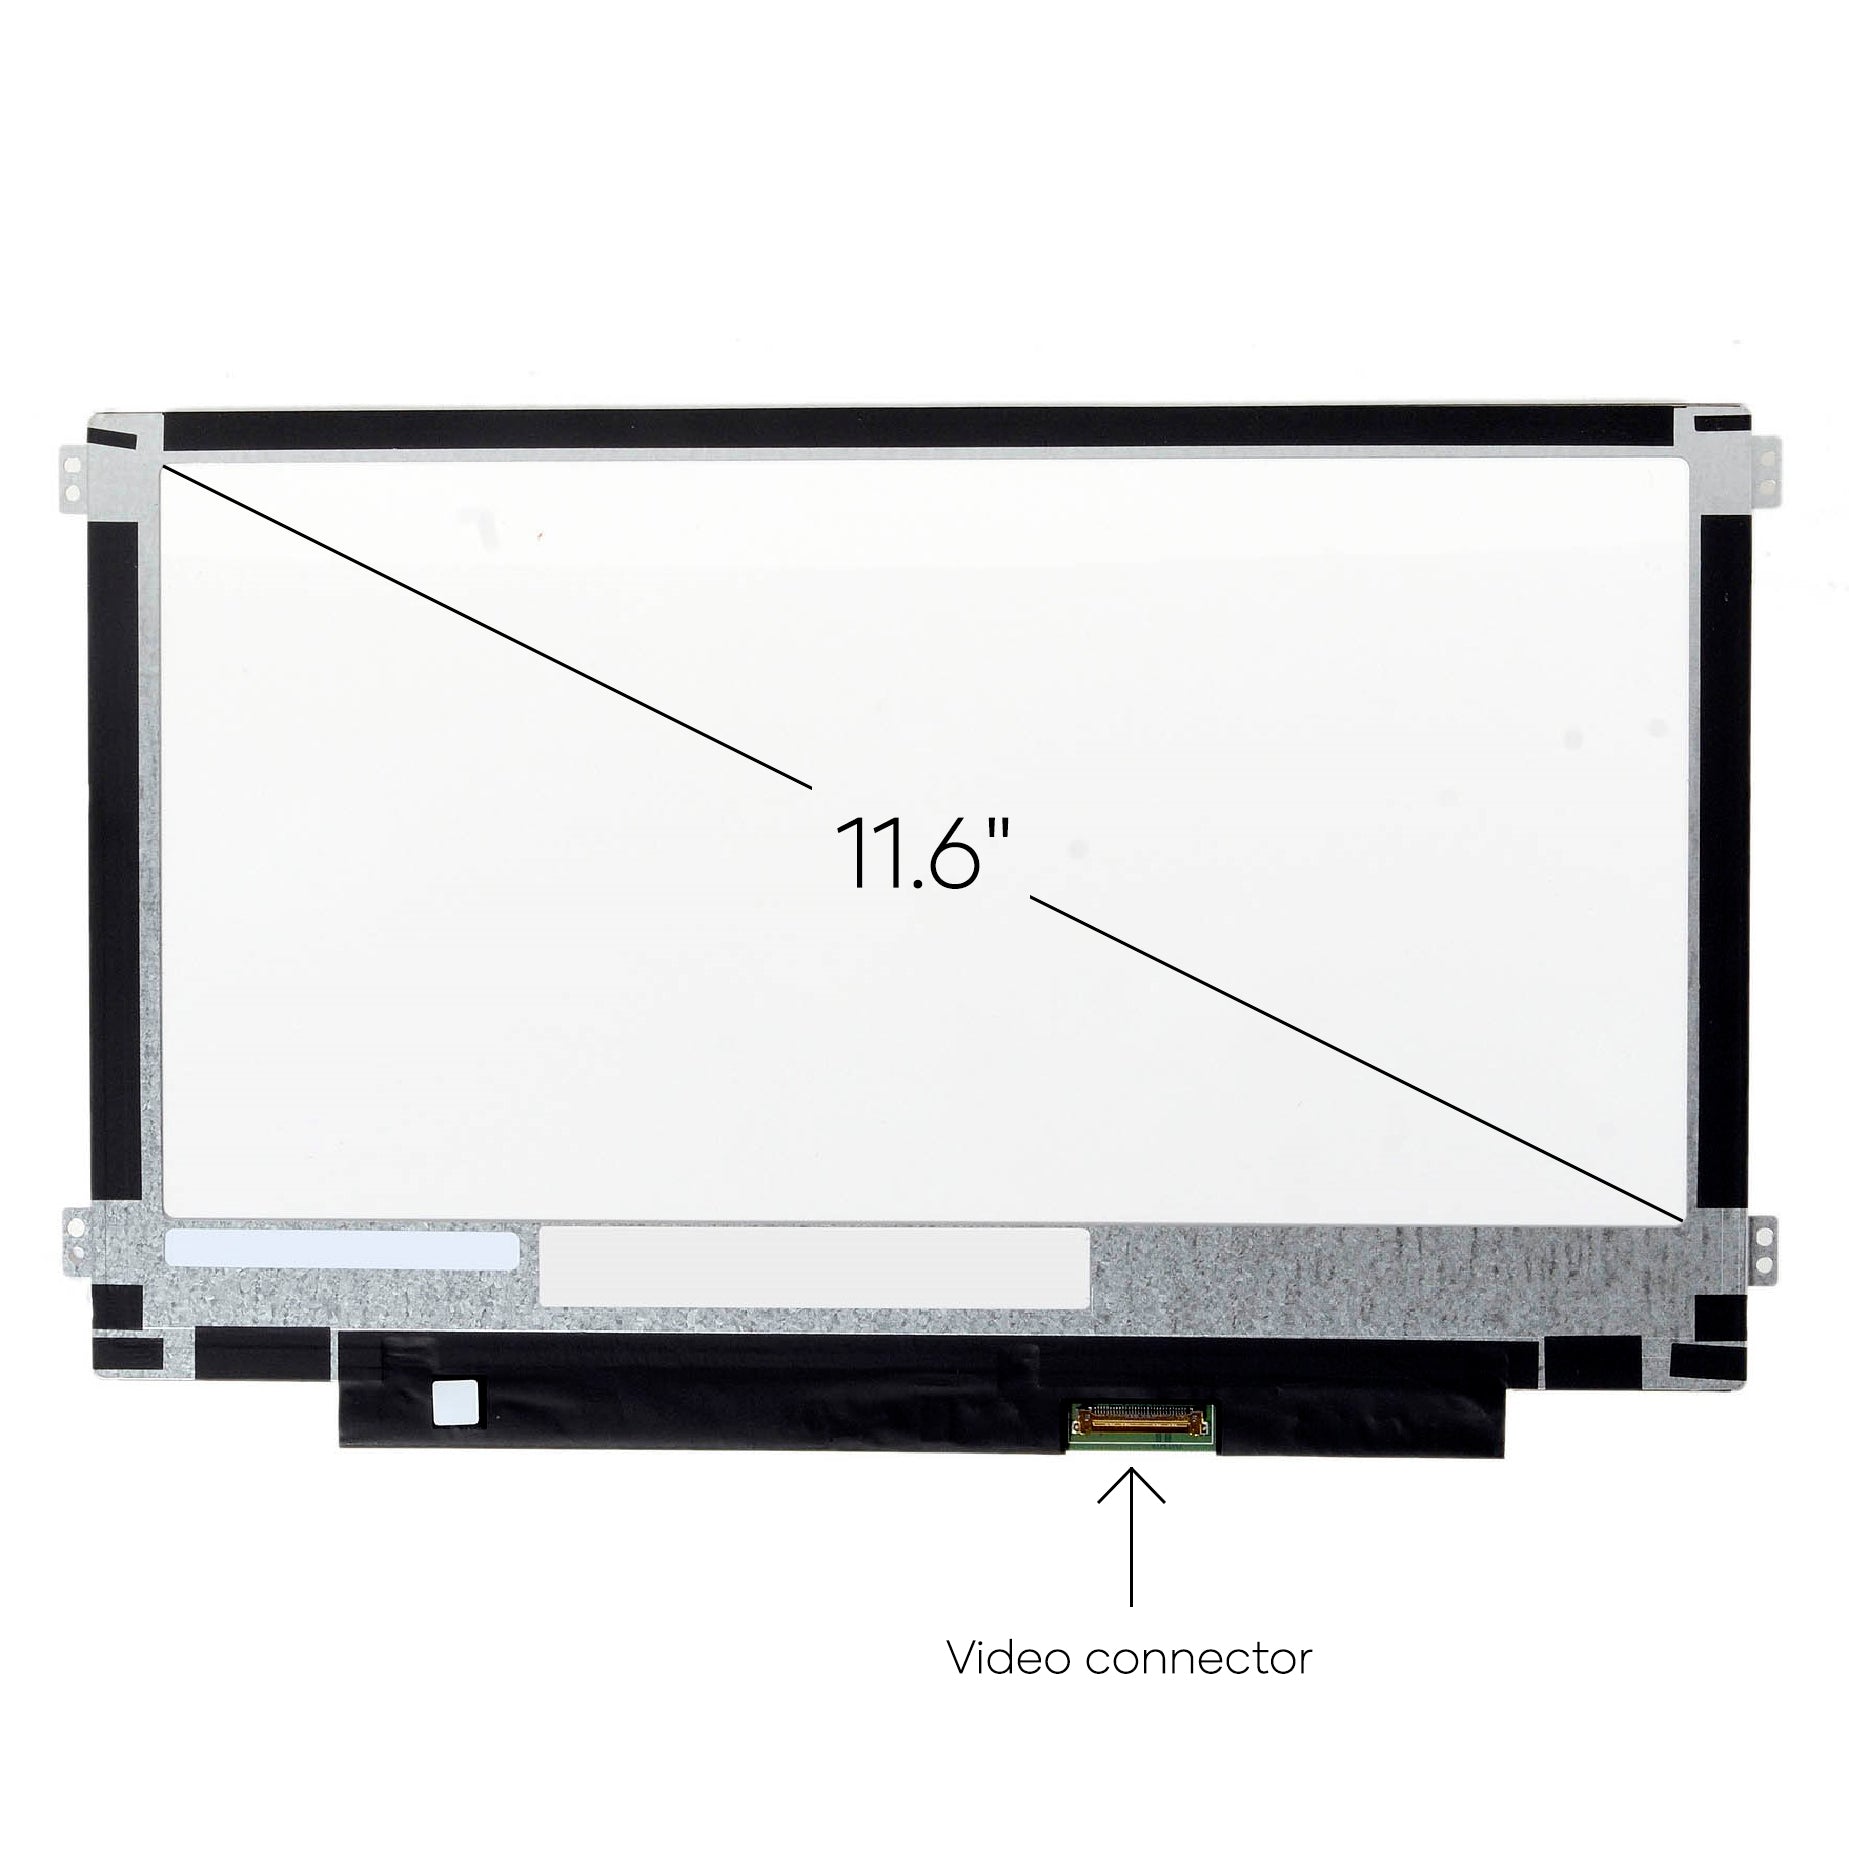 Screen Replacement for Samsung Chromebook XE500C13-S02US HD 1366x768 Matte LCD LED Display